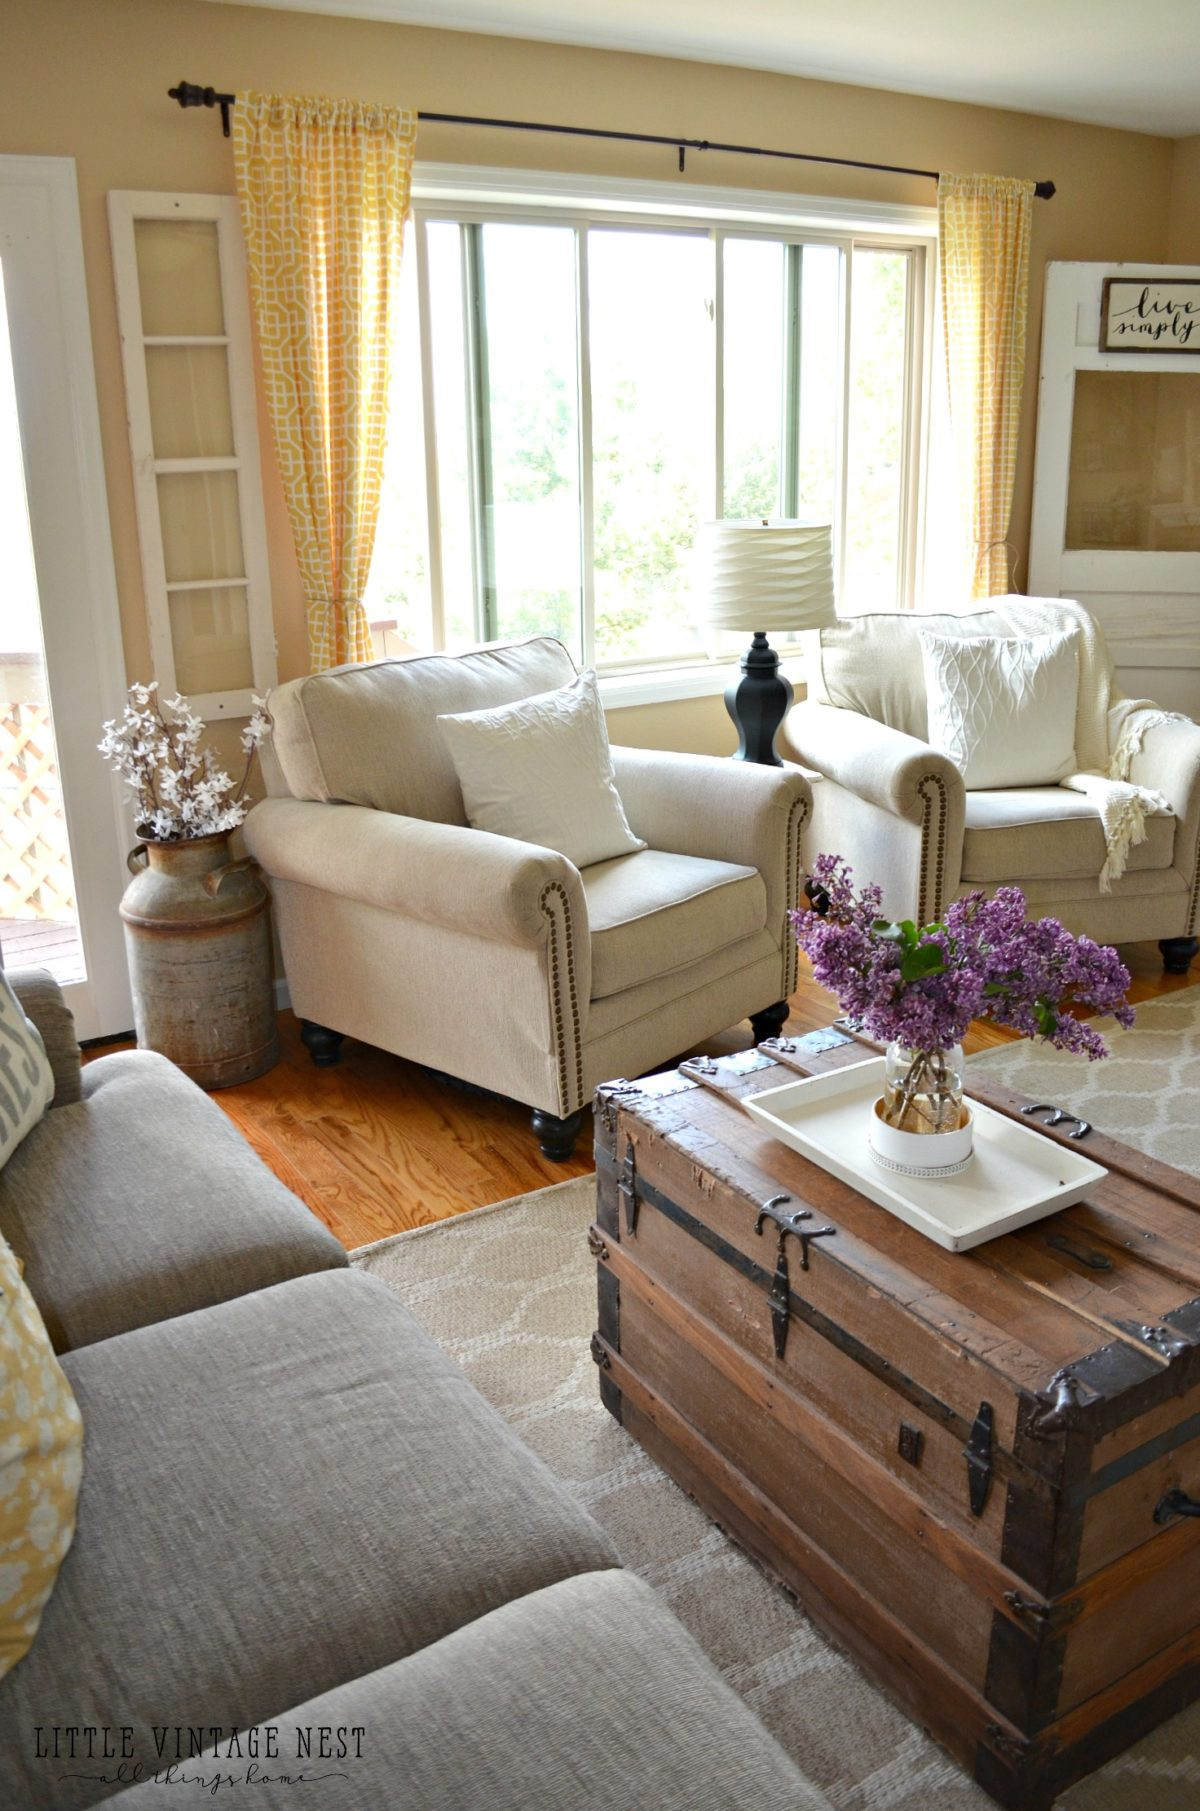 Farmhouse Living Room Ideas
 How I Transitioned to Farmhouse Style Little Vintage Nest